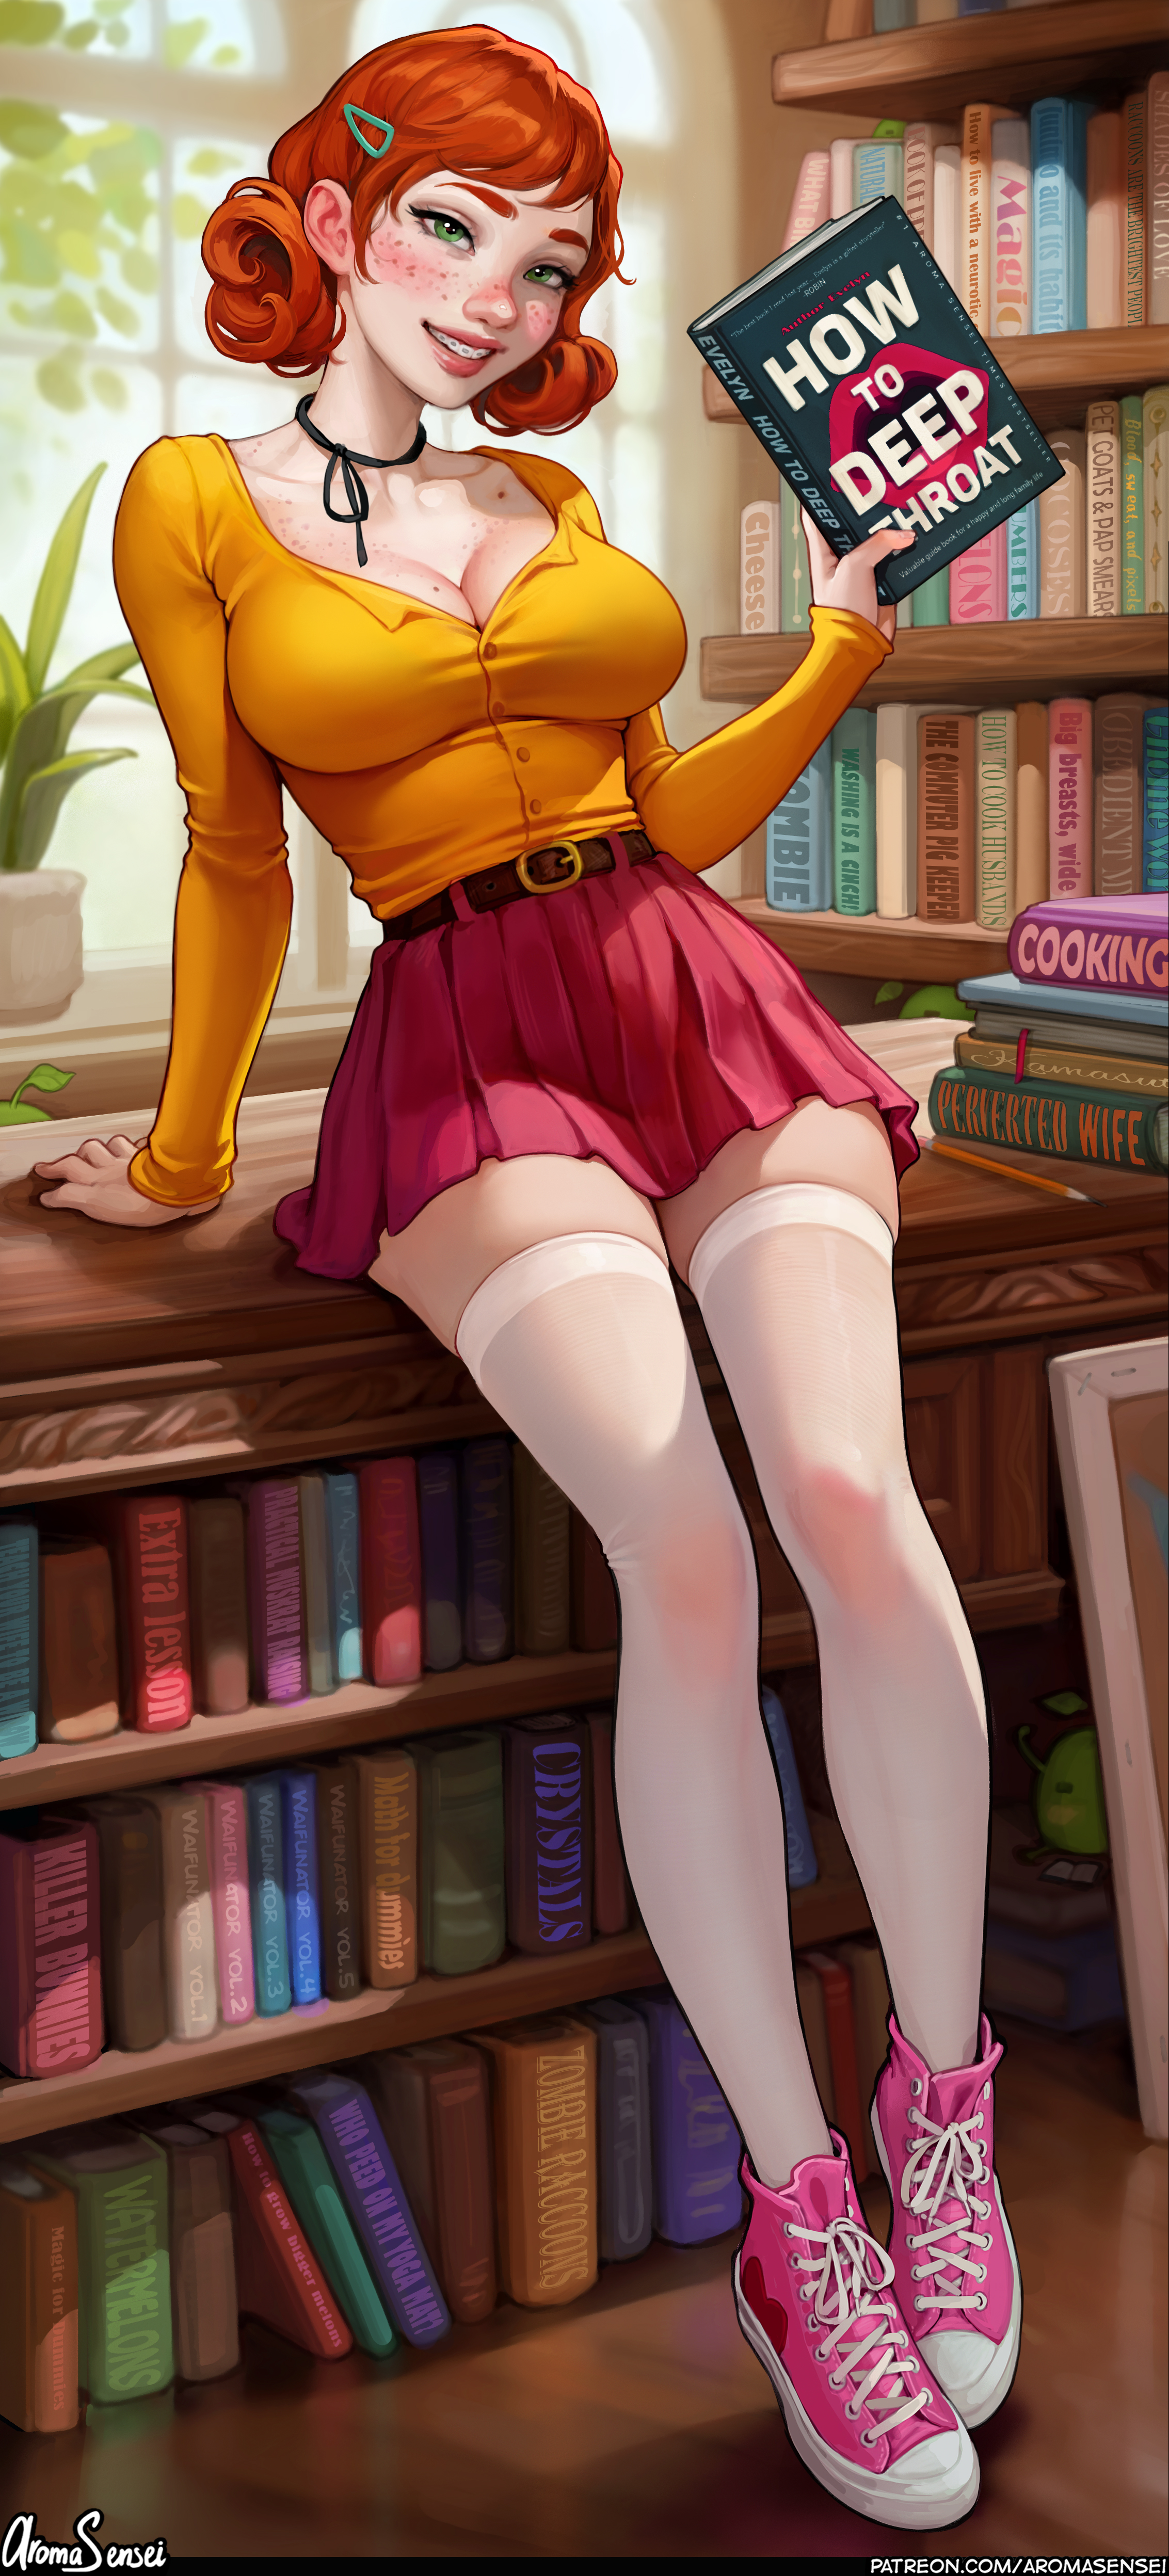 General 2265x4992 Penny (Stardew Valley) video game characters artwork drawing fan art Aroma Sensei white thigh highs sneakers pink sneakers sitting miniskirt yellow tops cleavage book in hand tiptoe big boobs freckles (body) freckles books bookshelves library watermarked video game girls skirt video games shelves blushing Stardew Valley highly sexual text thighs